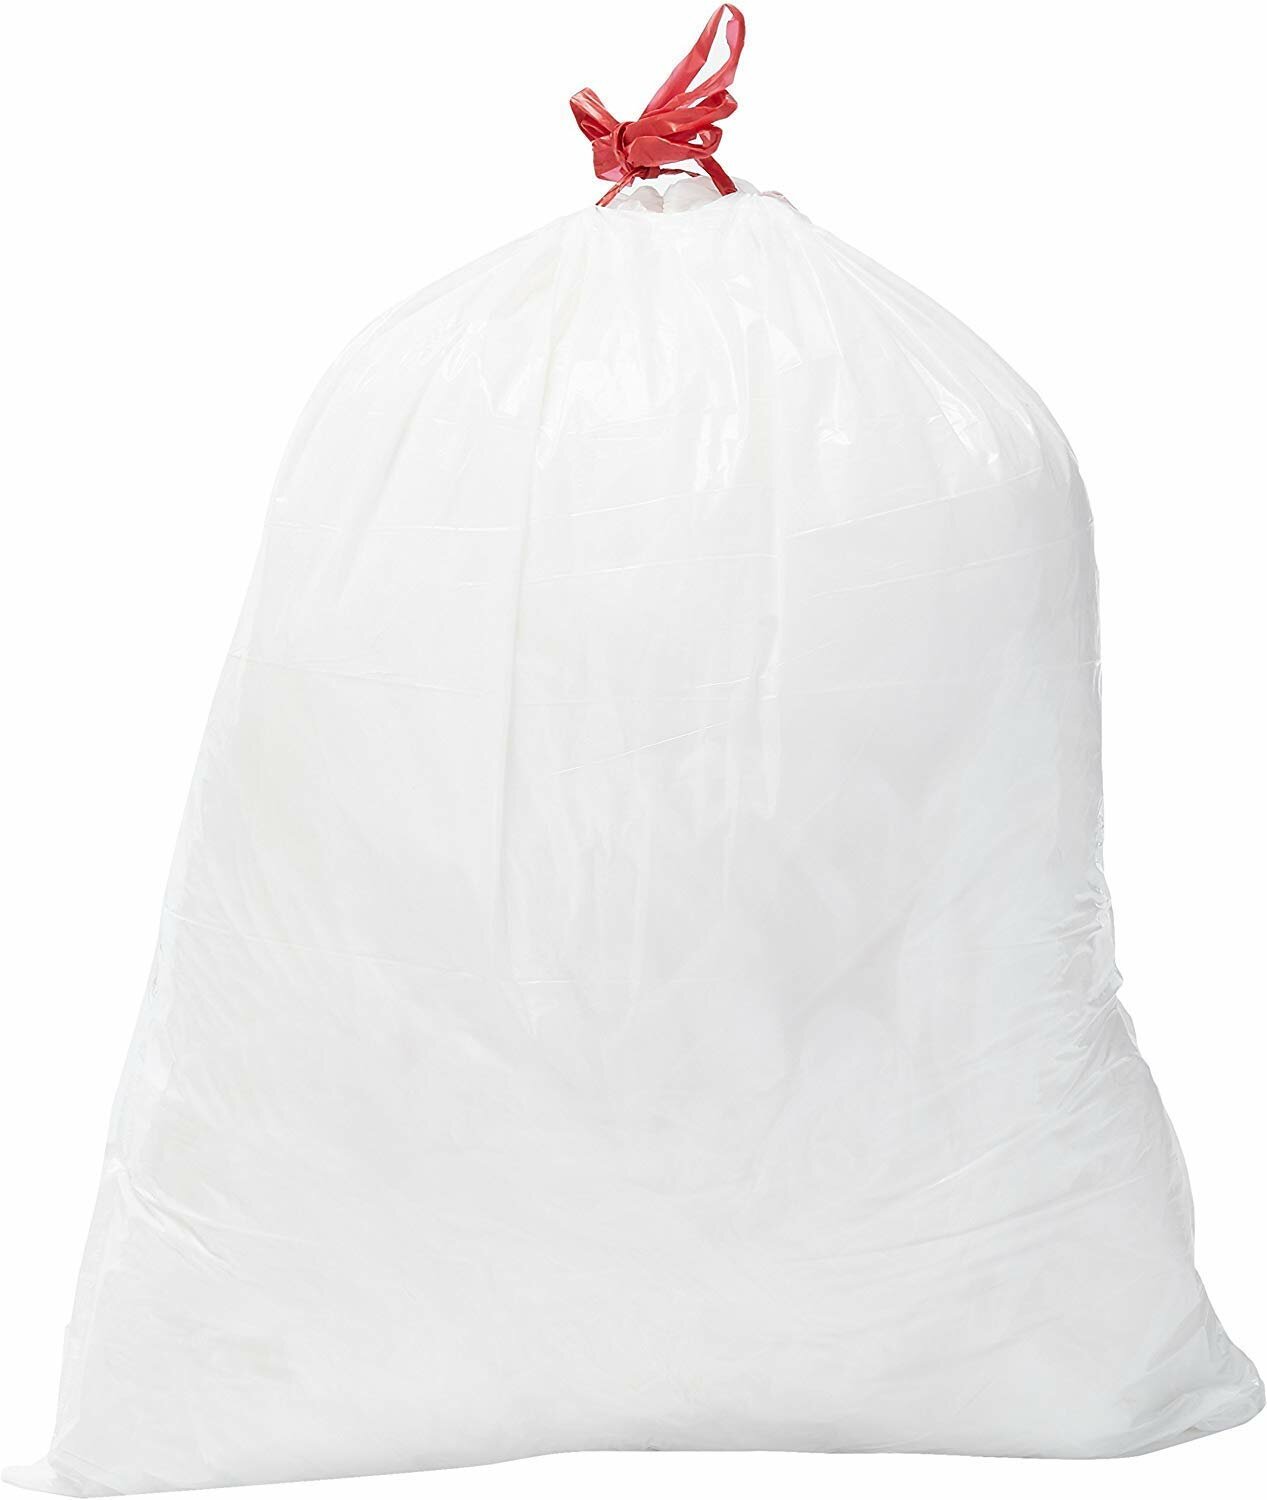 100 Count Trash Bag Drawstring 4 Gallon Garbage Bags for Trash Cans,  Office, Kit